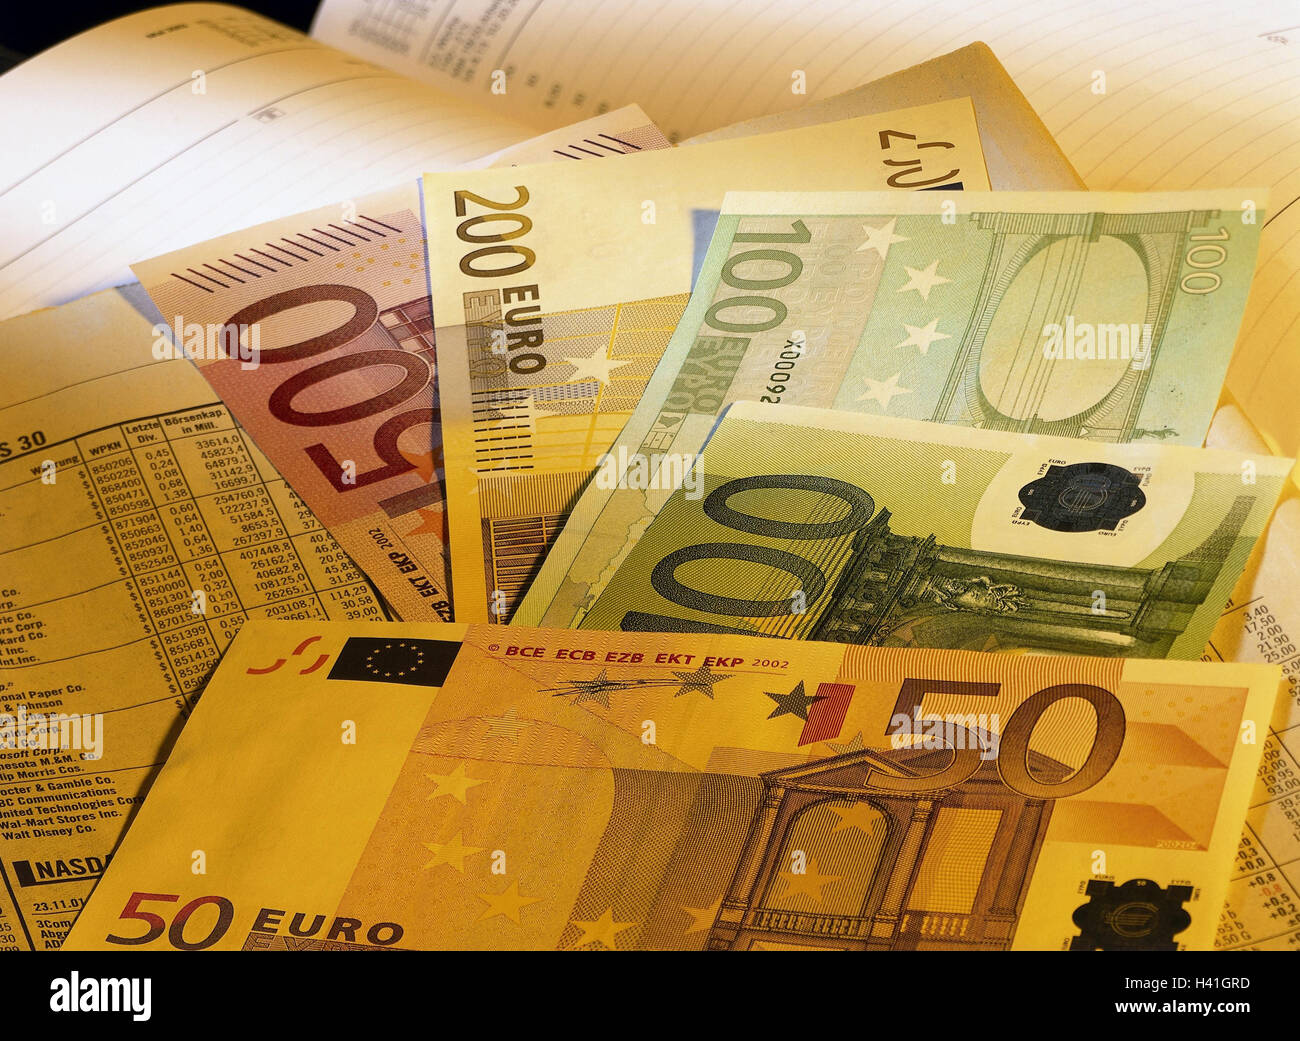 Calendars, financial paper, bank notes, euro, Still life, product photography, banknotes, money, cash, currency, currency unit, single currency, means payment, European, the EU, stock exchange, plant, investment, speculate, close up Stock Photo